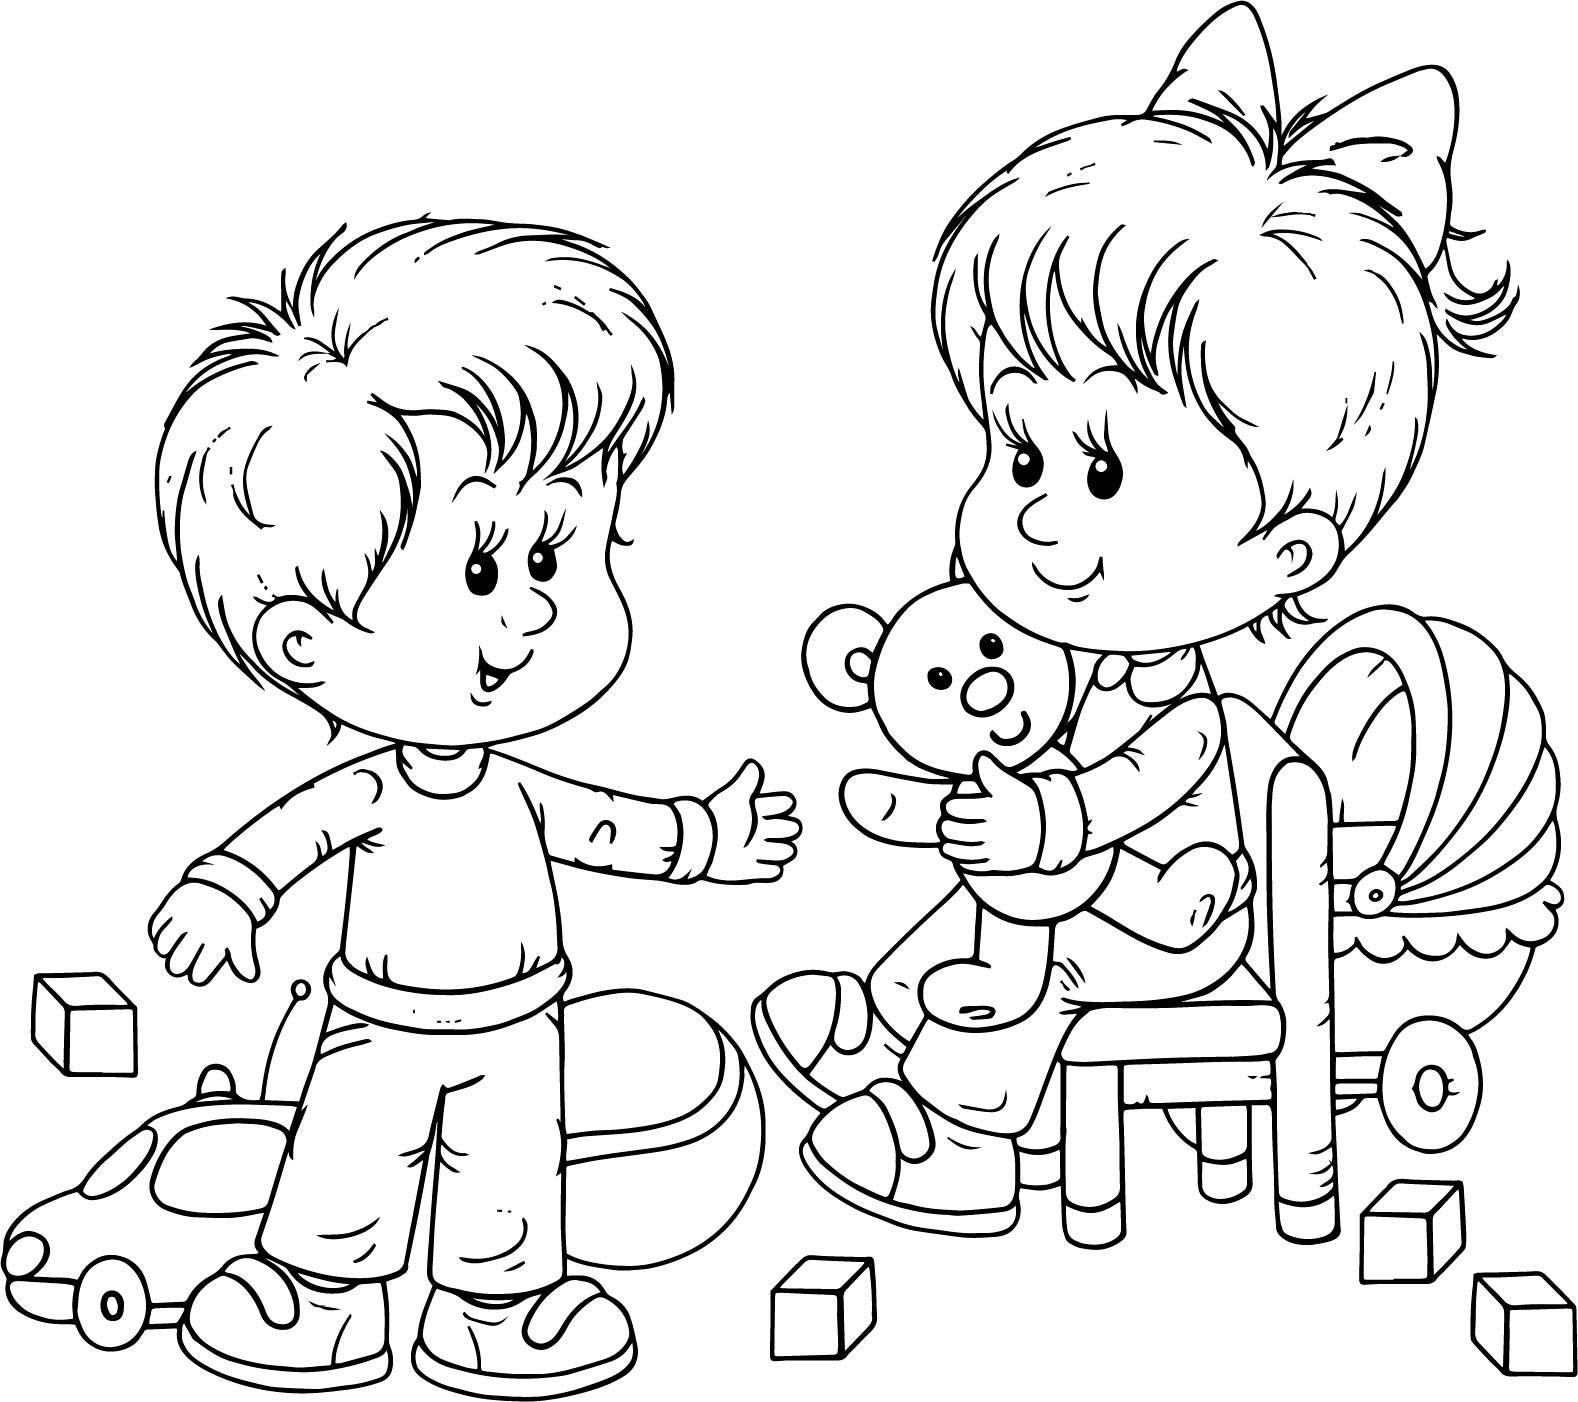 Girls And Boys Coloring Pages
 Preschool Boy And Girl Playing Toys Coloring Page